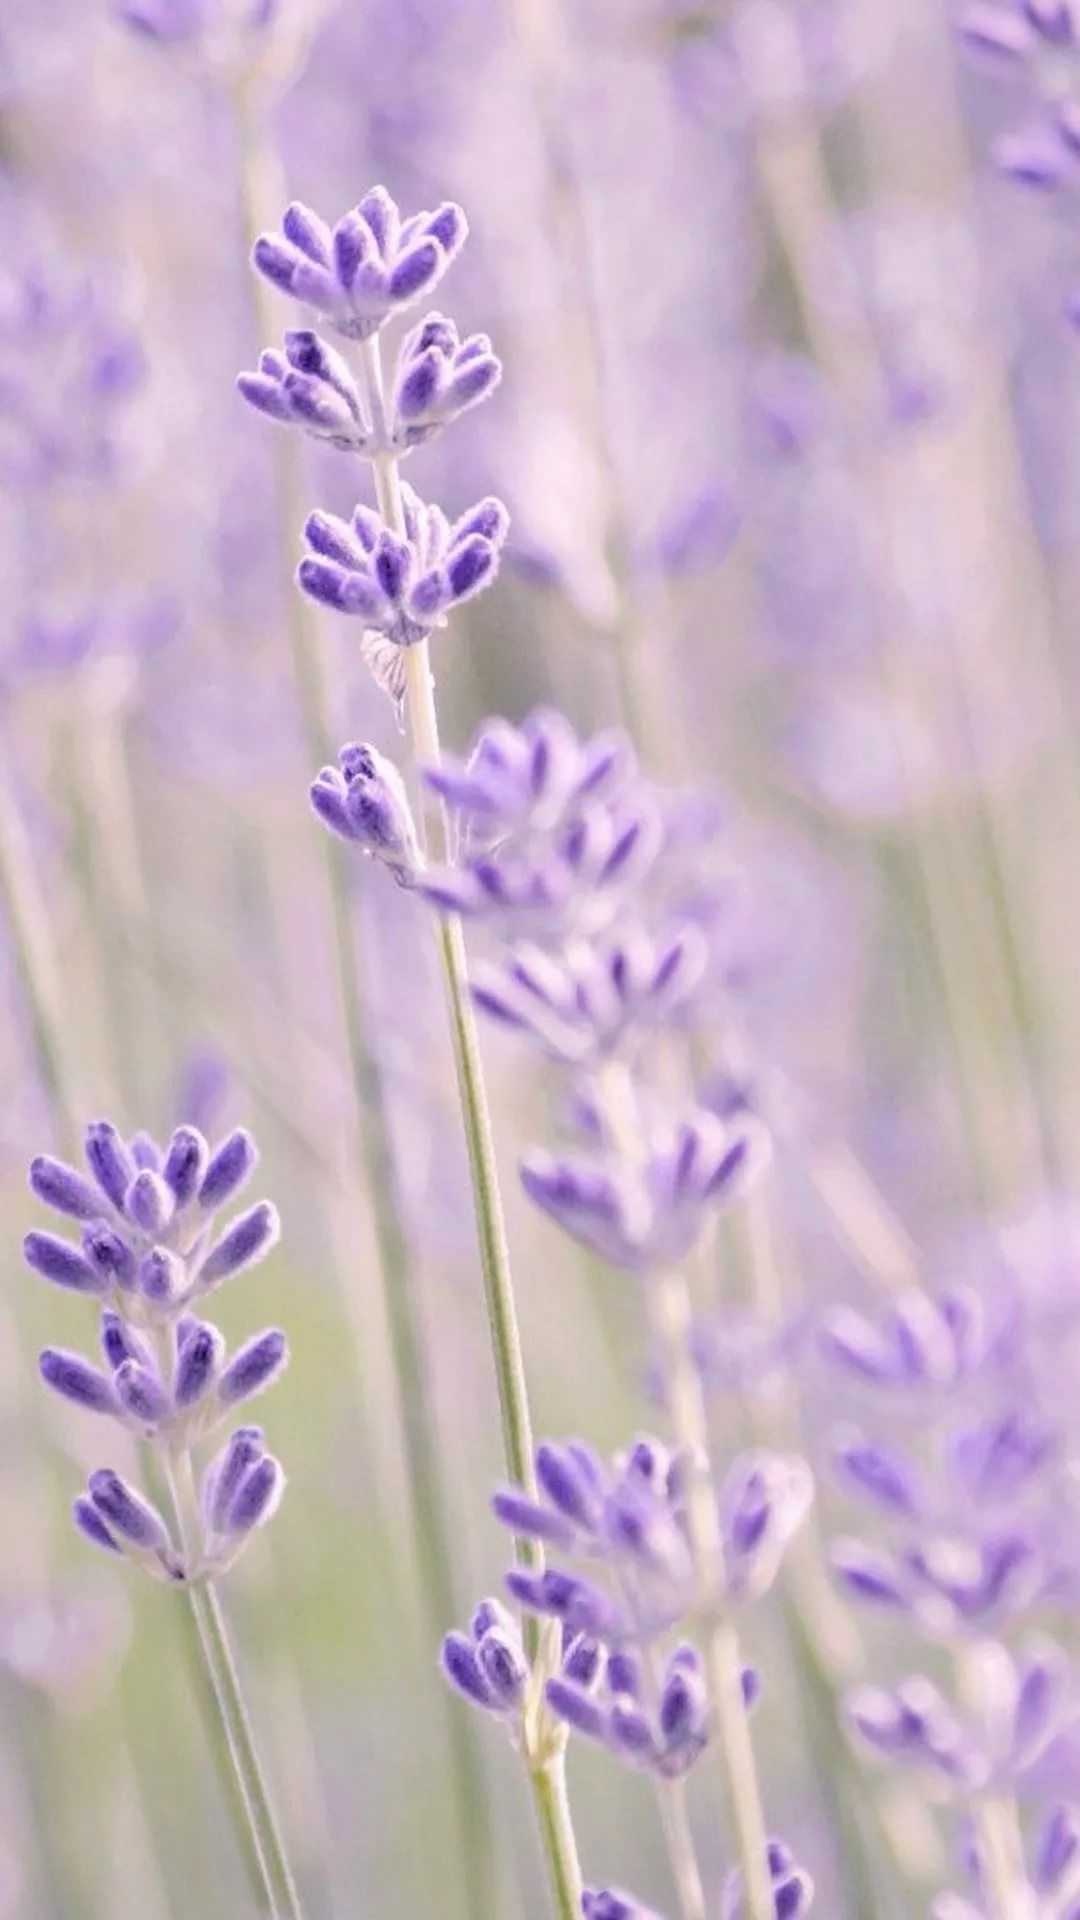 Lavender iPhone wallpaper, Free HD wallpapers, Floral fascination, Mobile beauty, 1080x1920 Full HD Phone